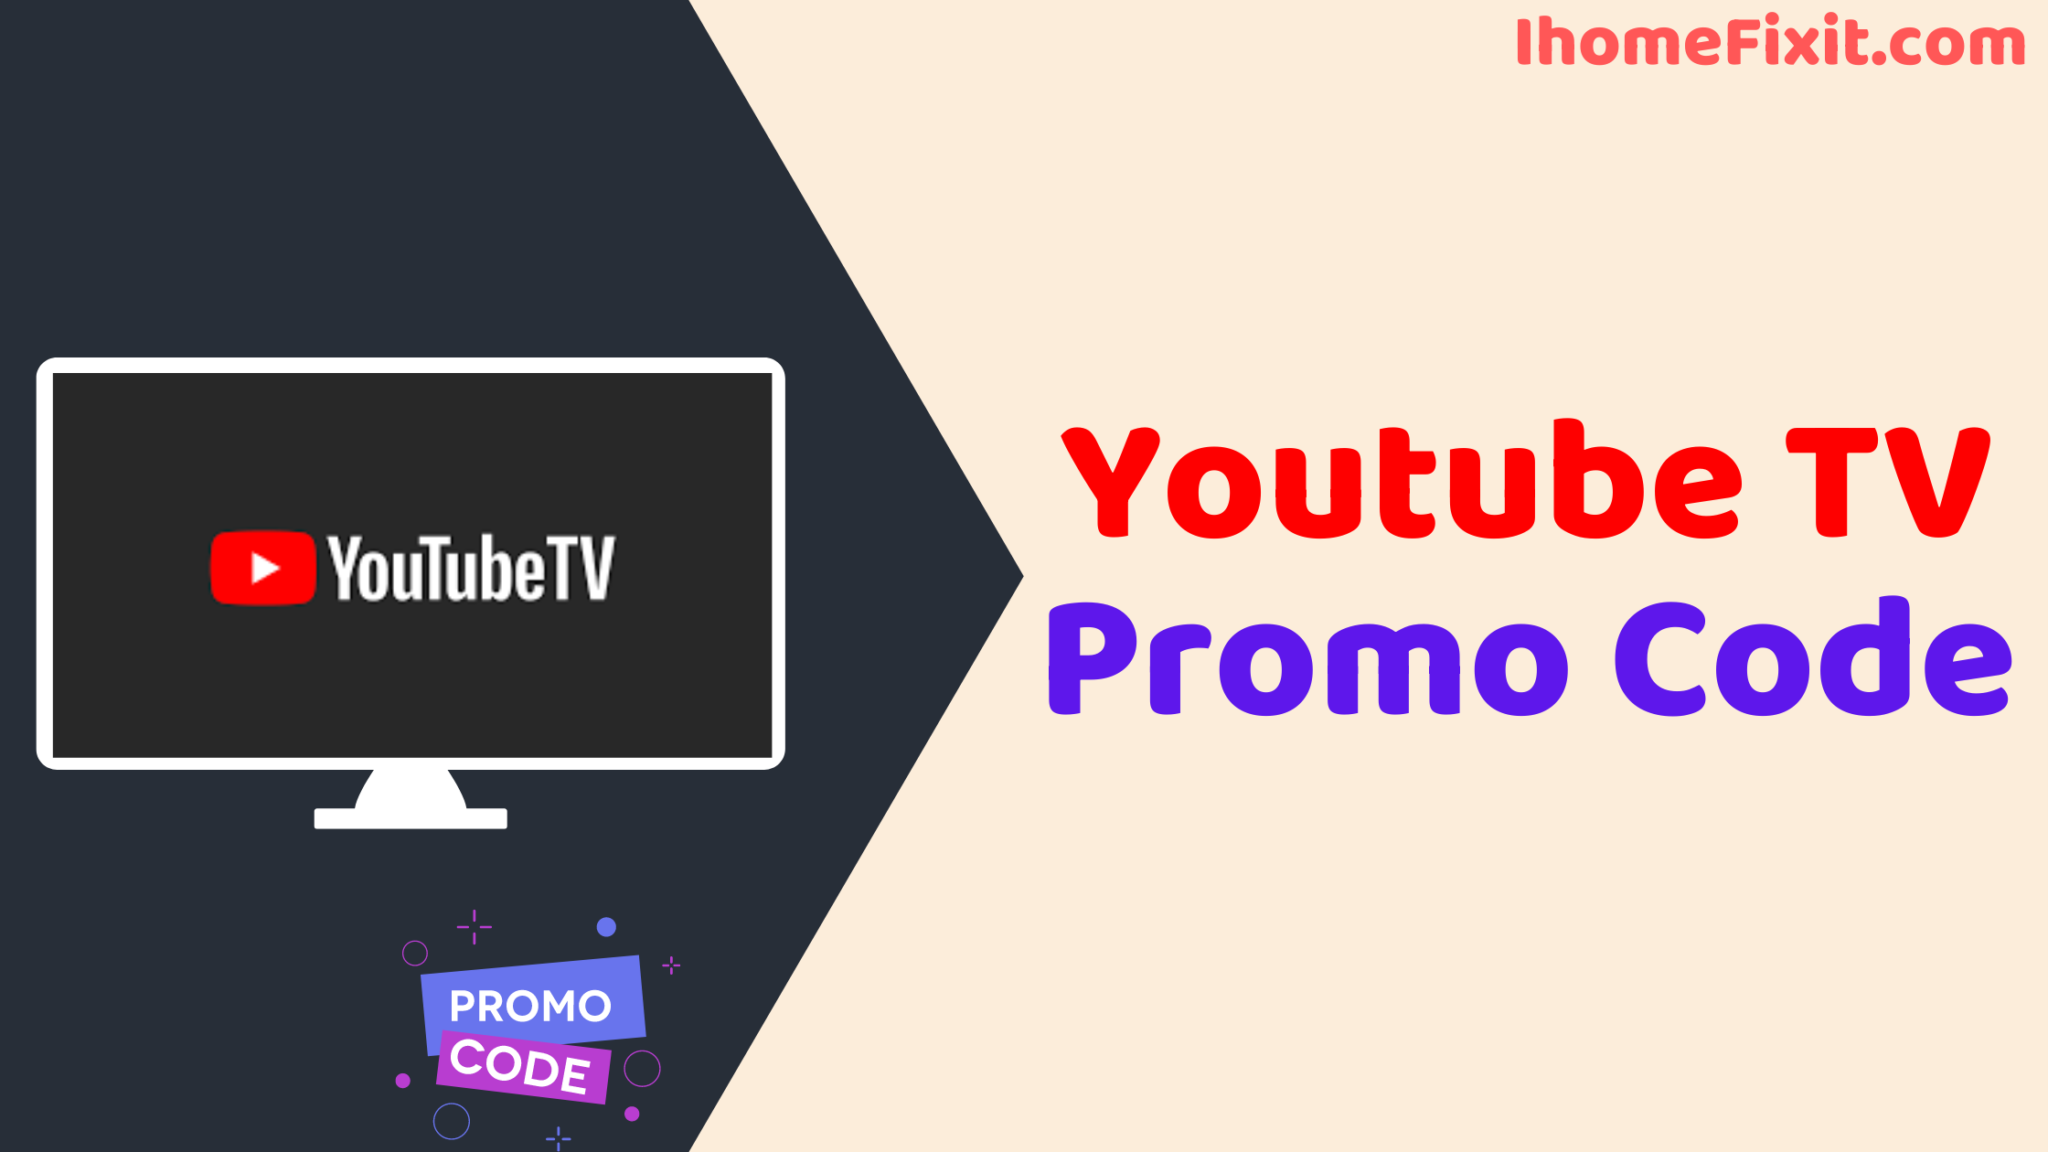 YouTube TV Promo Codes That Actually Work [99% Success]